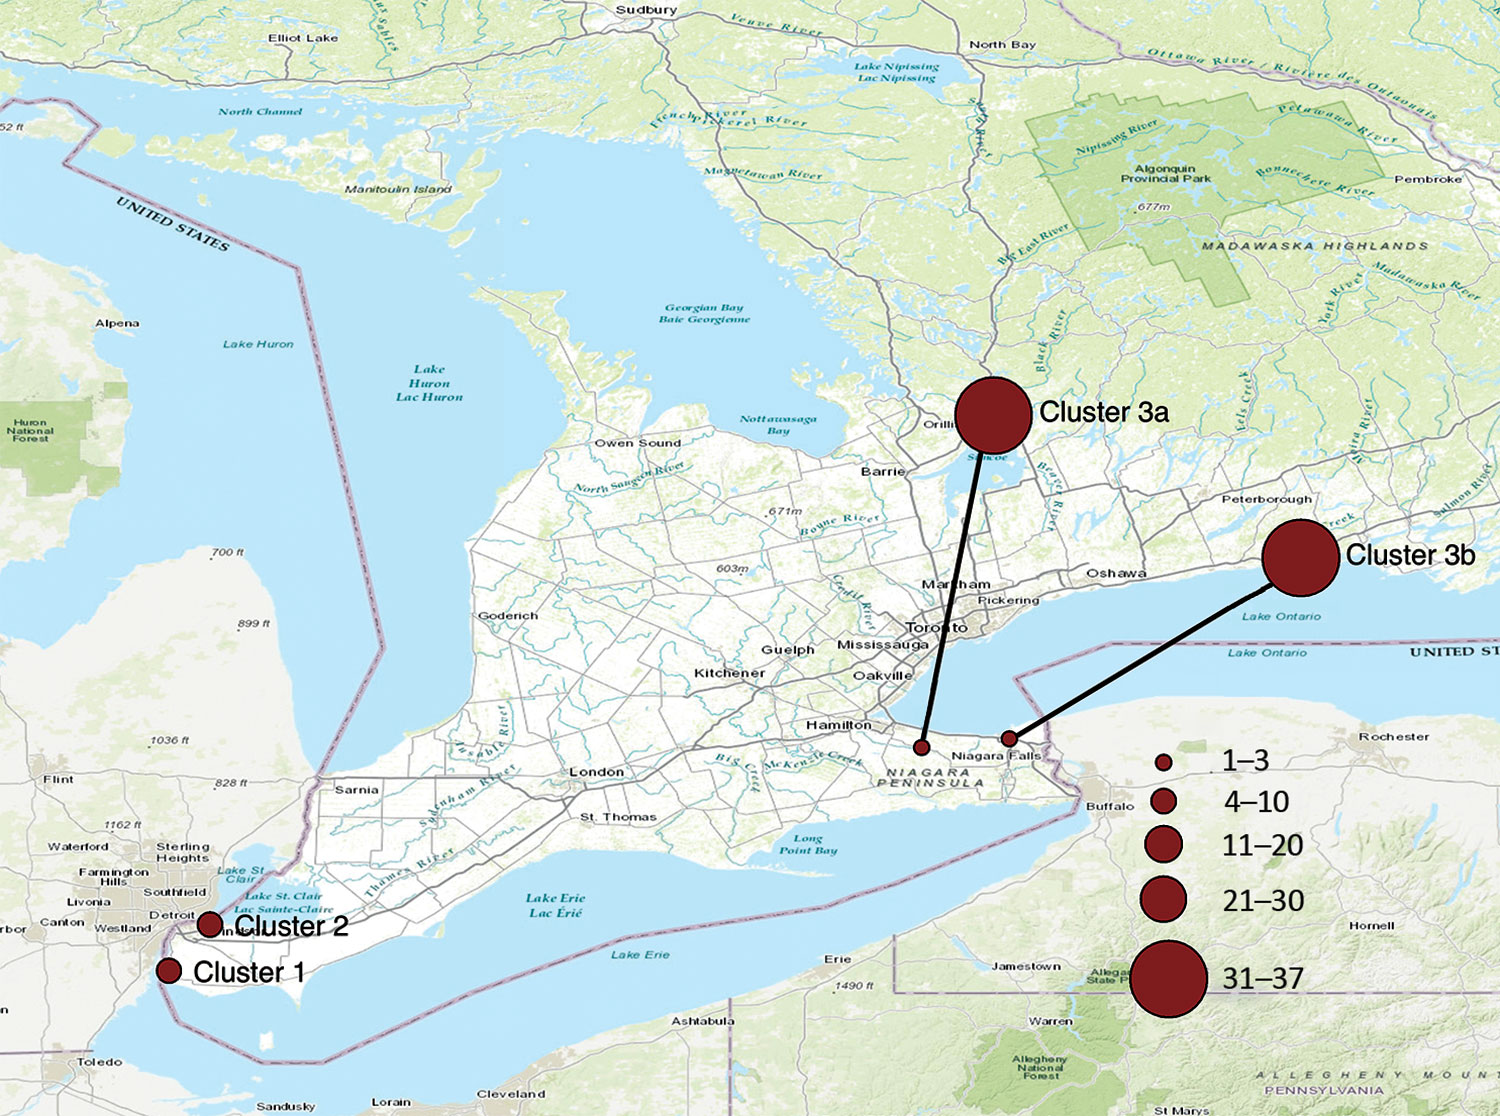 Approximate locations and number of dogs with diagnoses of canine influenza virus infection, Ontario, Canada, 2017–2018.